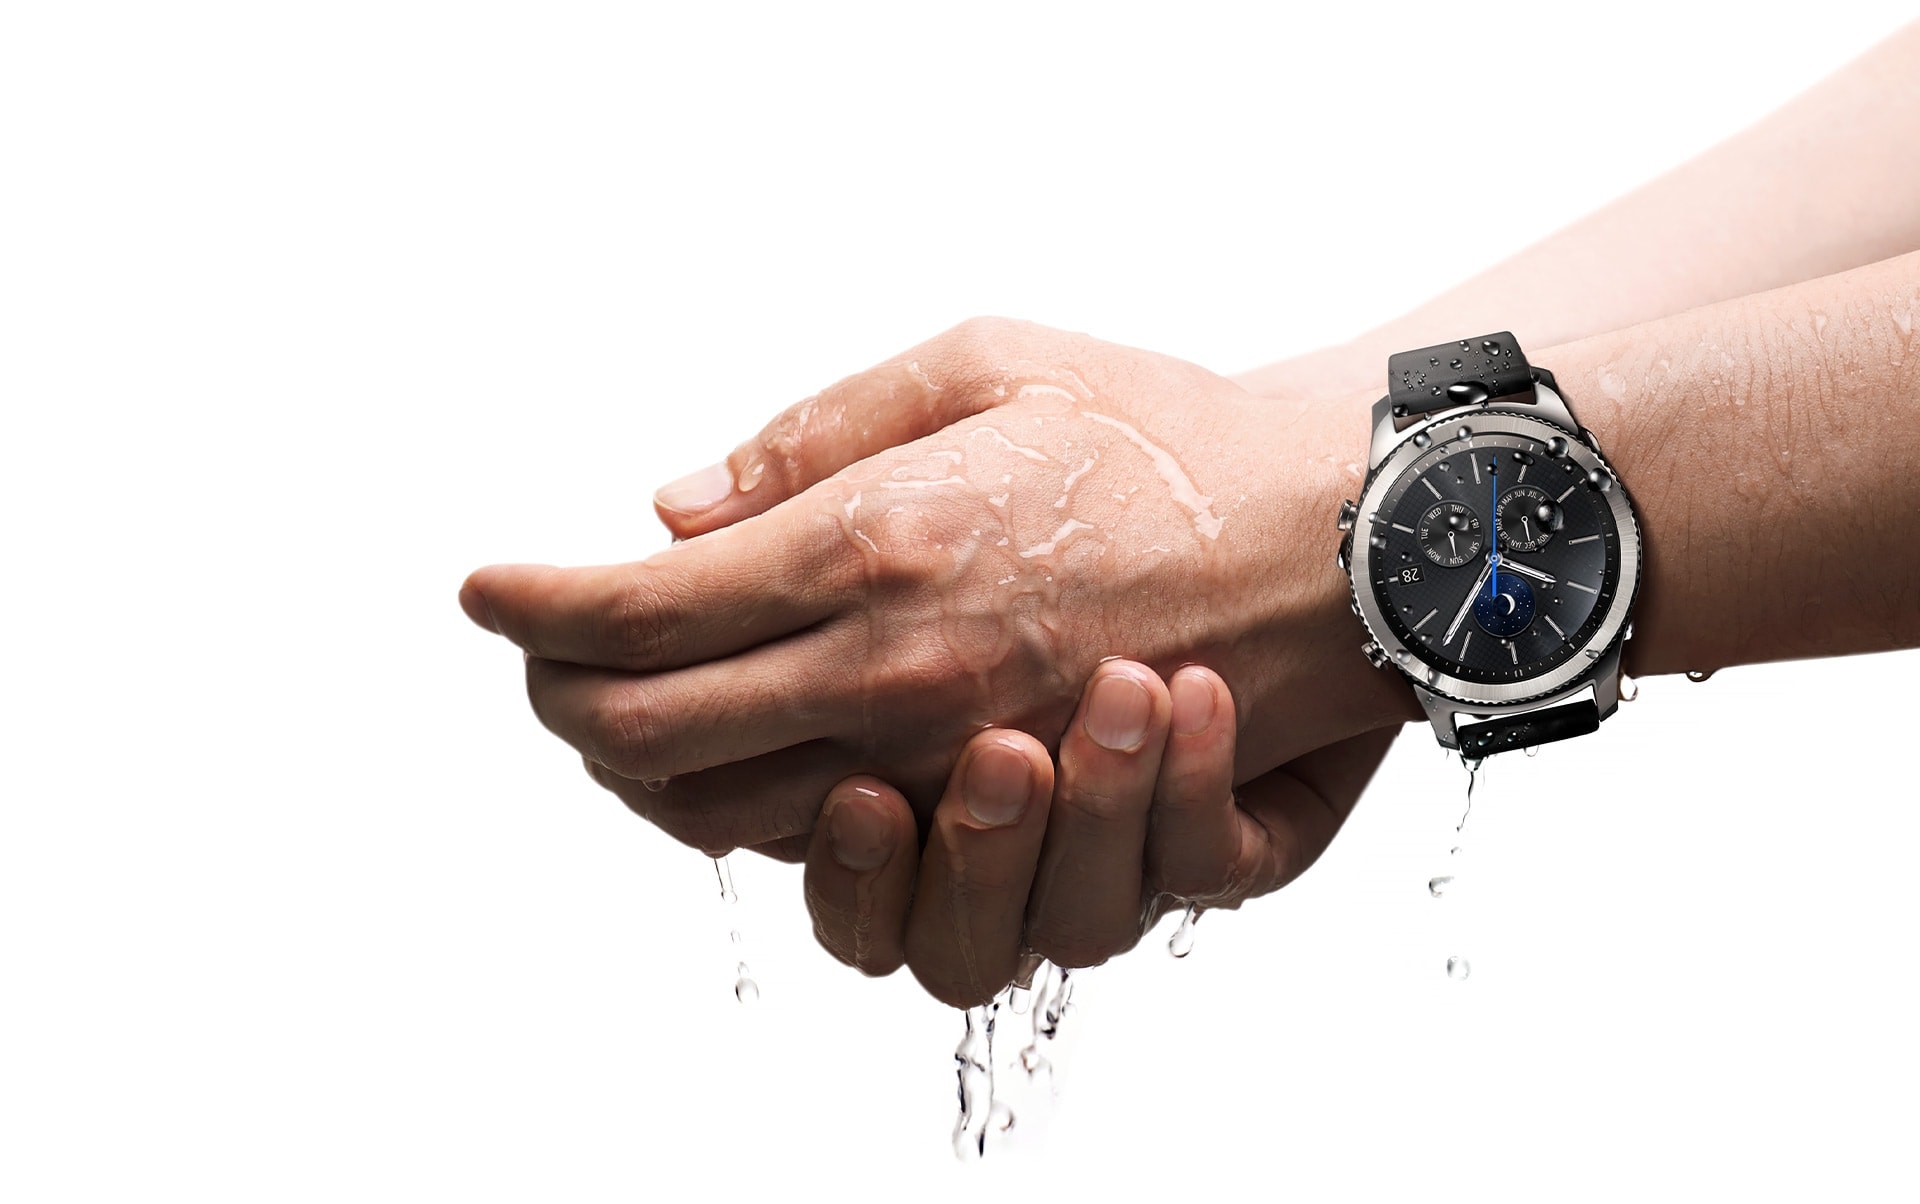 Image of a person washing hands while wearing Gear S3